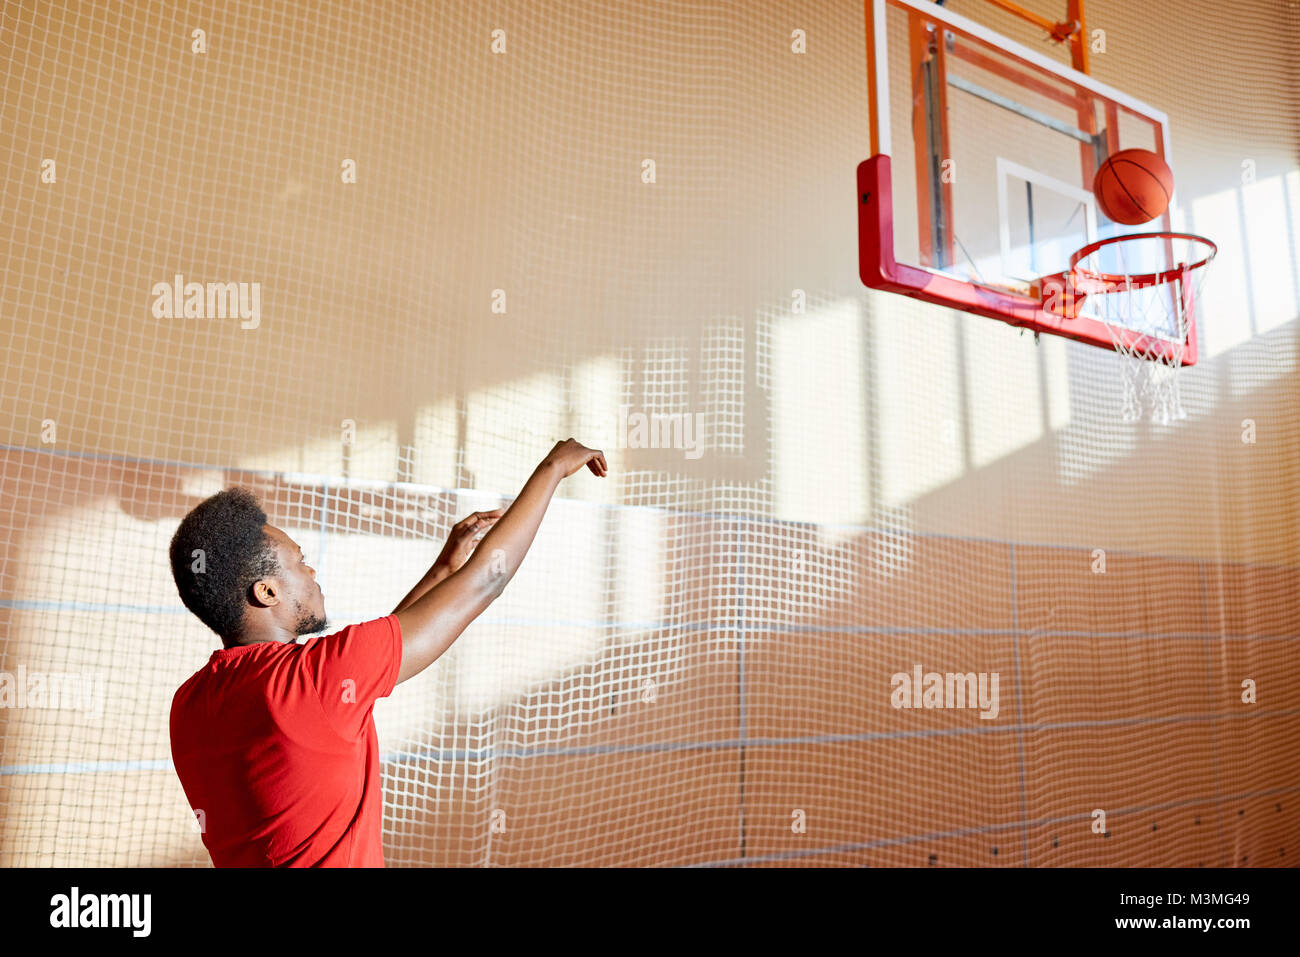 Skilled young basketball player training on court Stock Photo